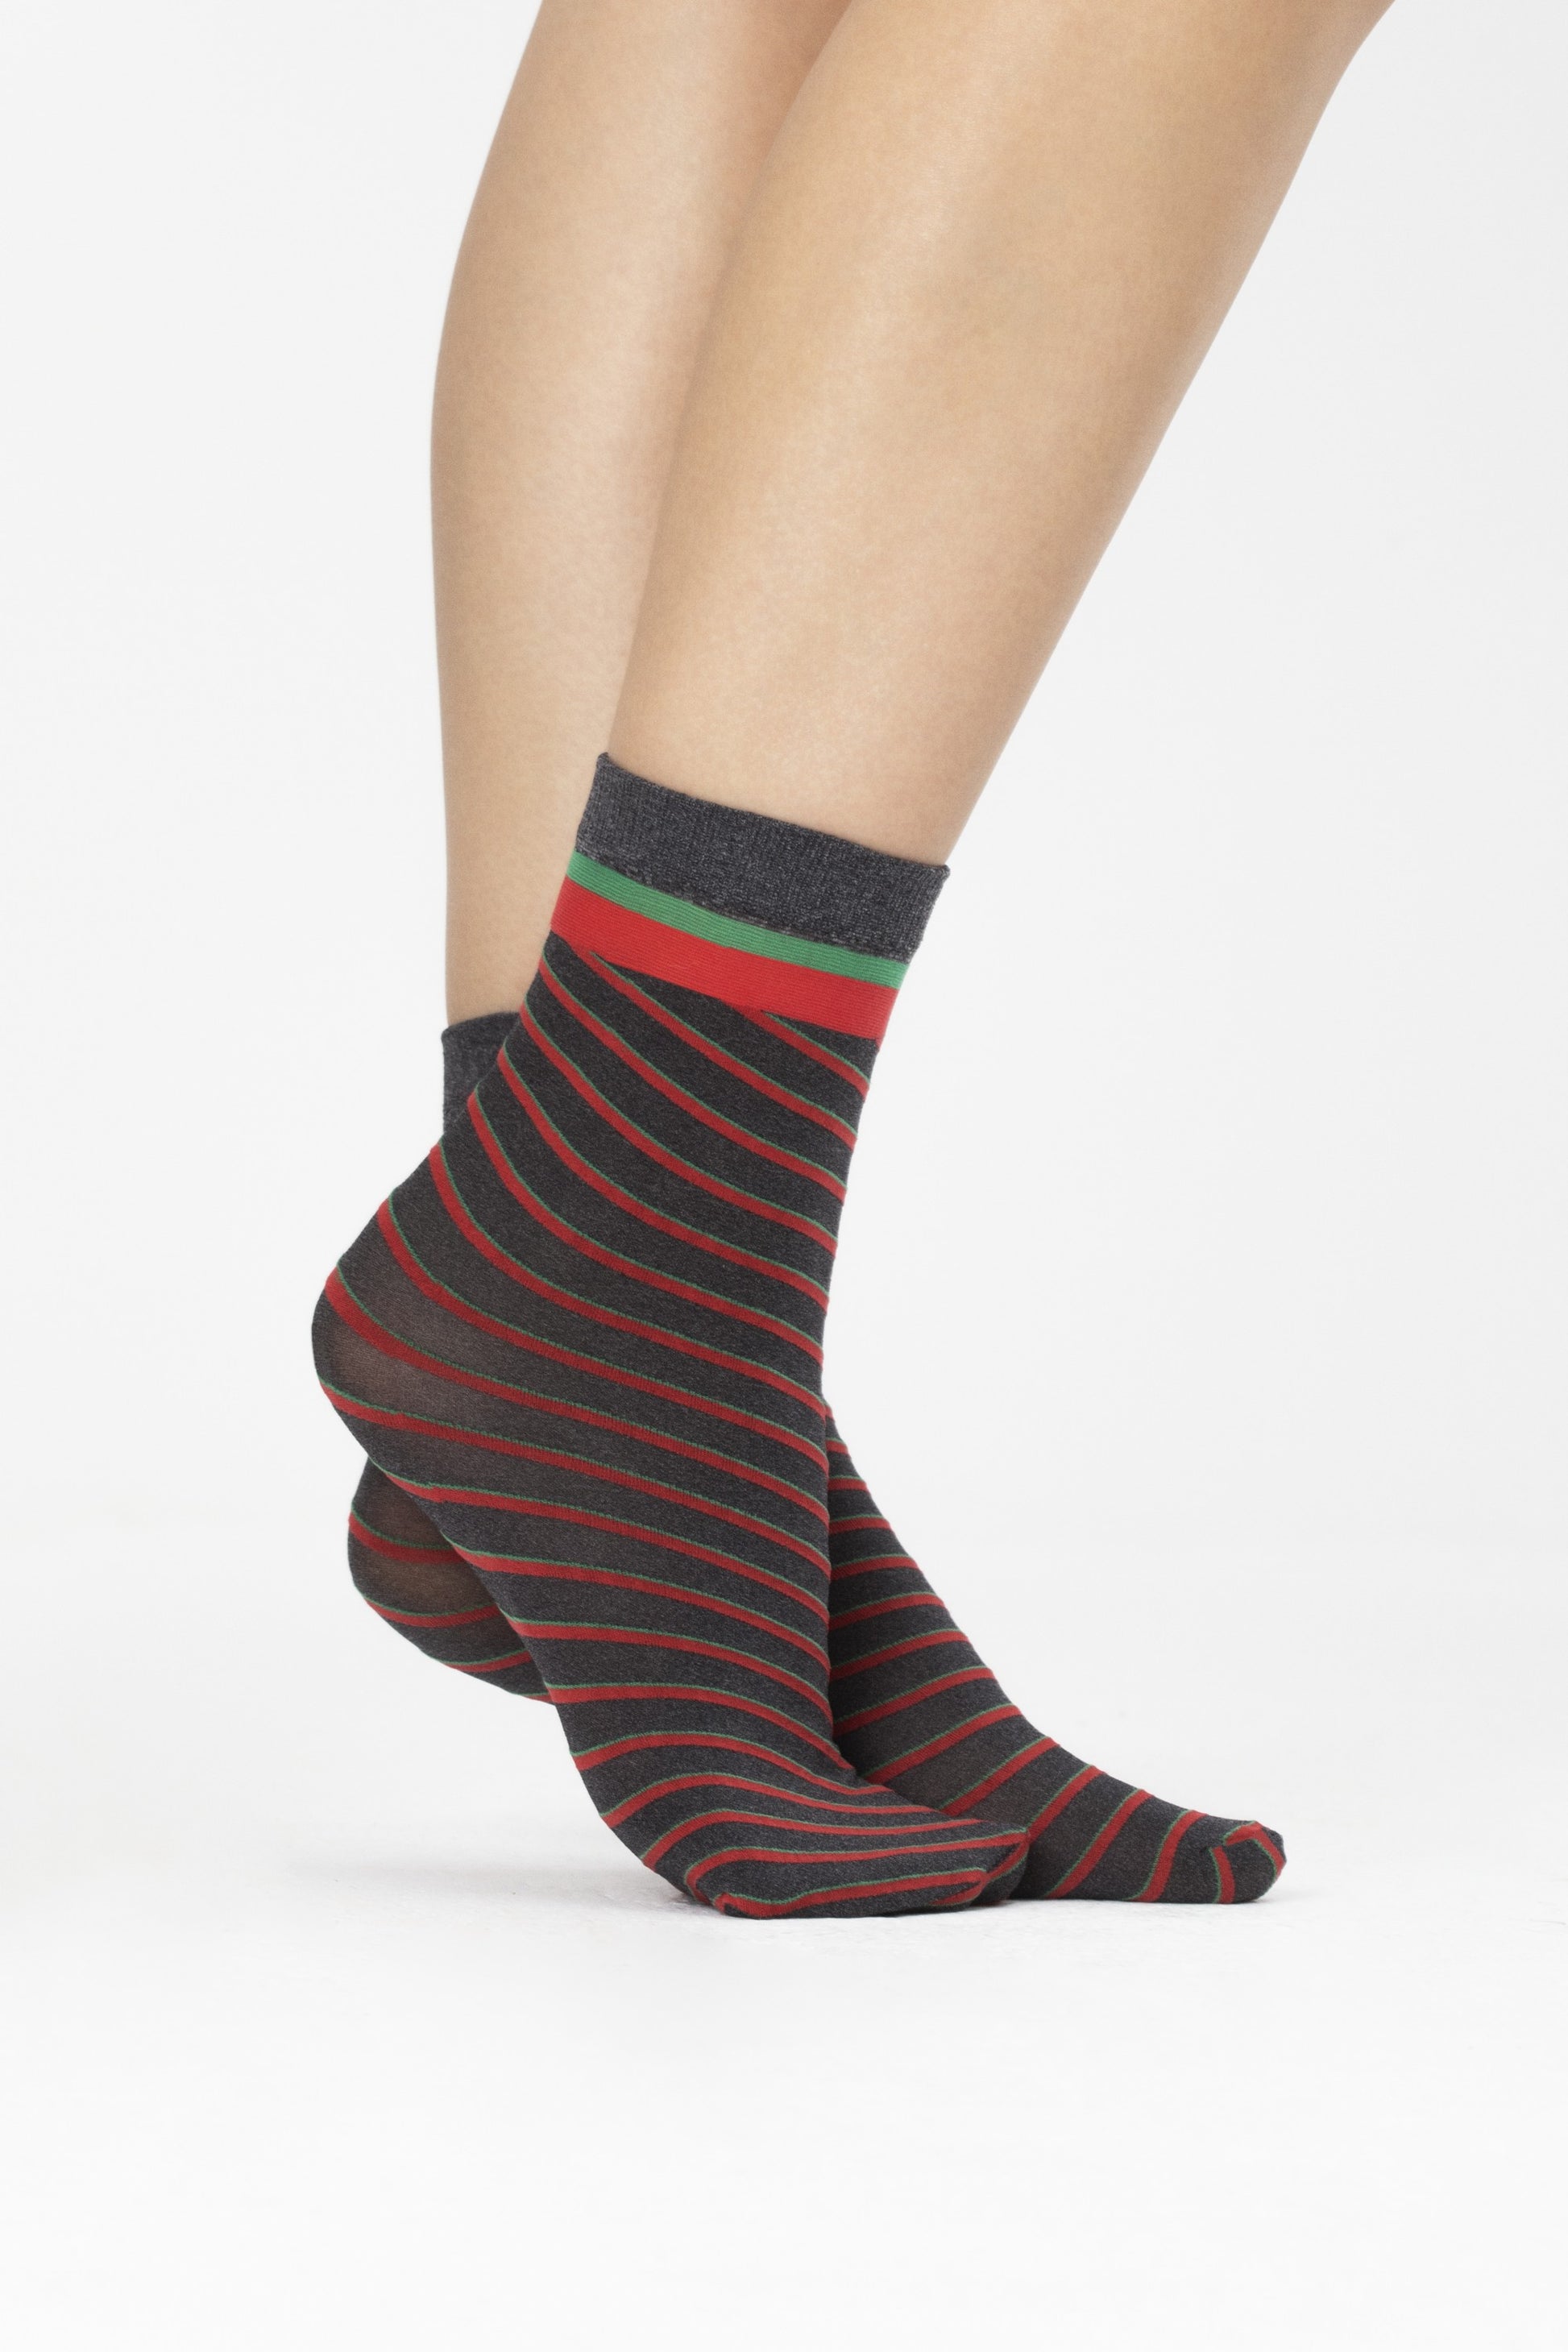 Fiore Elf Fun Sock - Dark grey opaque Christmas fashion ankle socks with a woven red and green diagonal stripe and green and red stripe cuff.